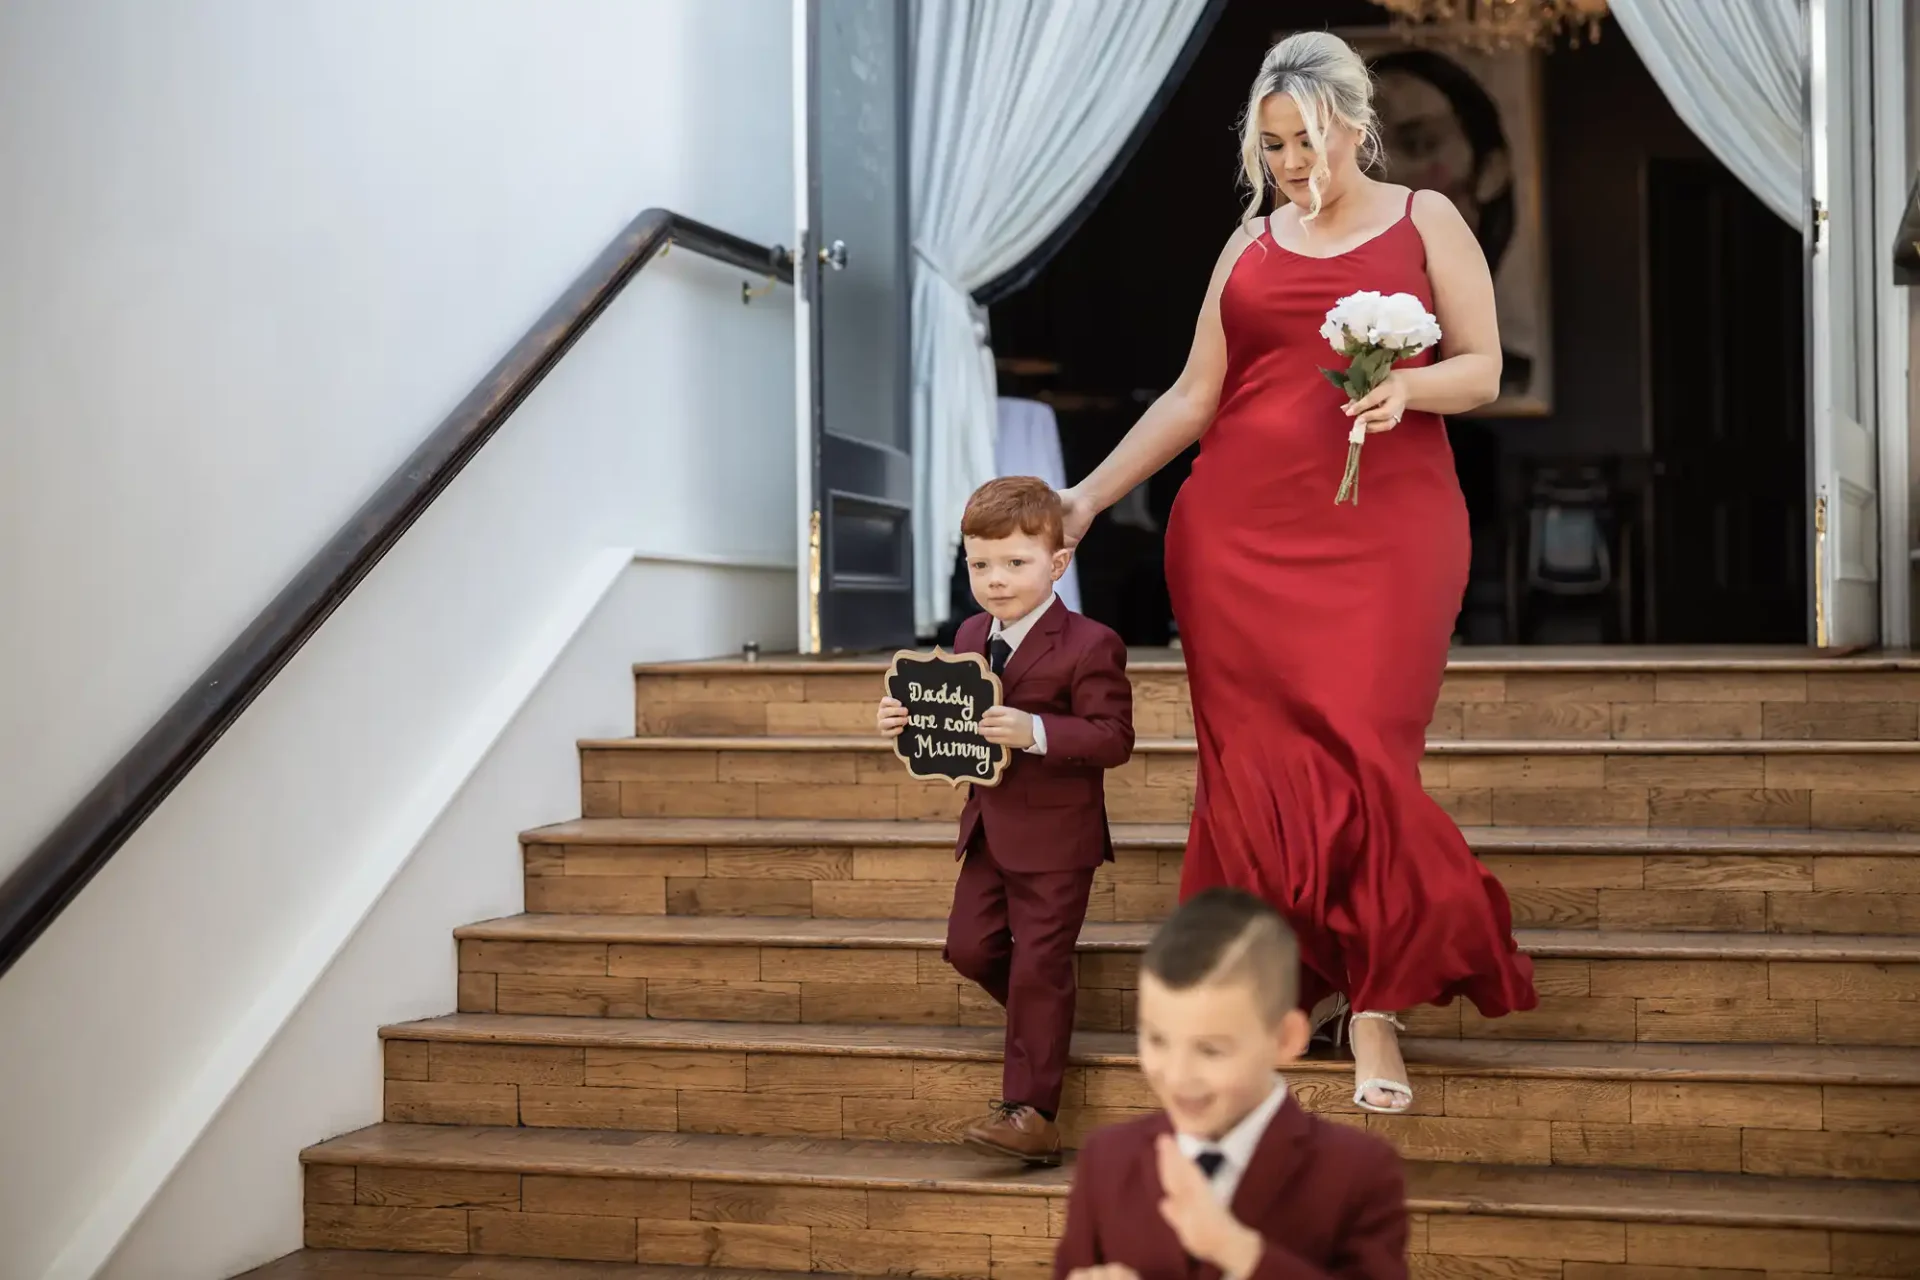 A woman in a red dress and a young boy in a suit descending stairs, with the boy holding a "daddy here comes mummy" sign. another boy runs in the foreground.